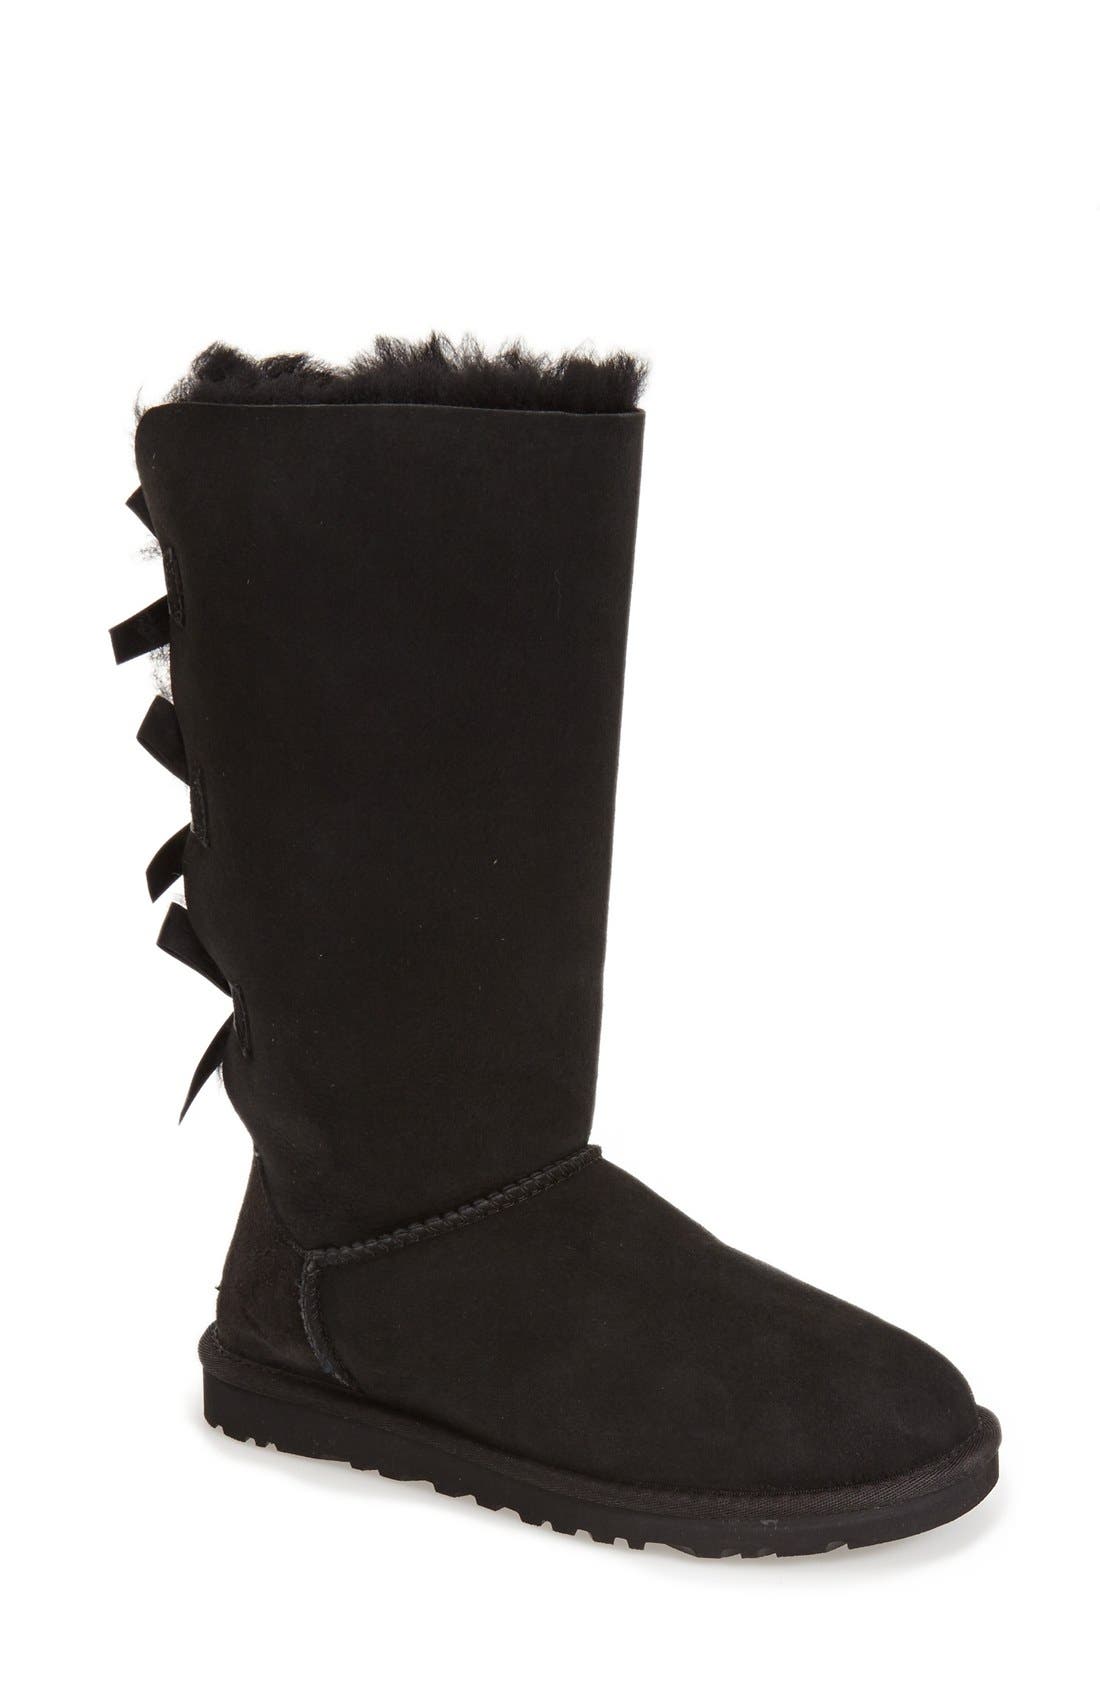 ugg bailey bow tall nordstrom